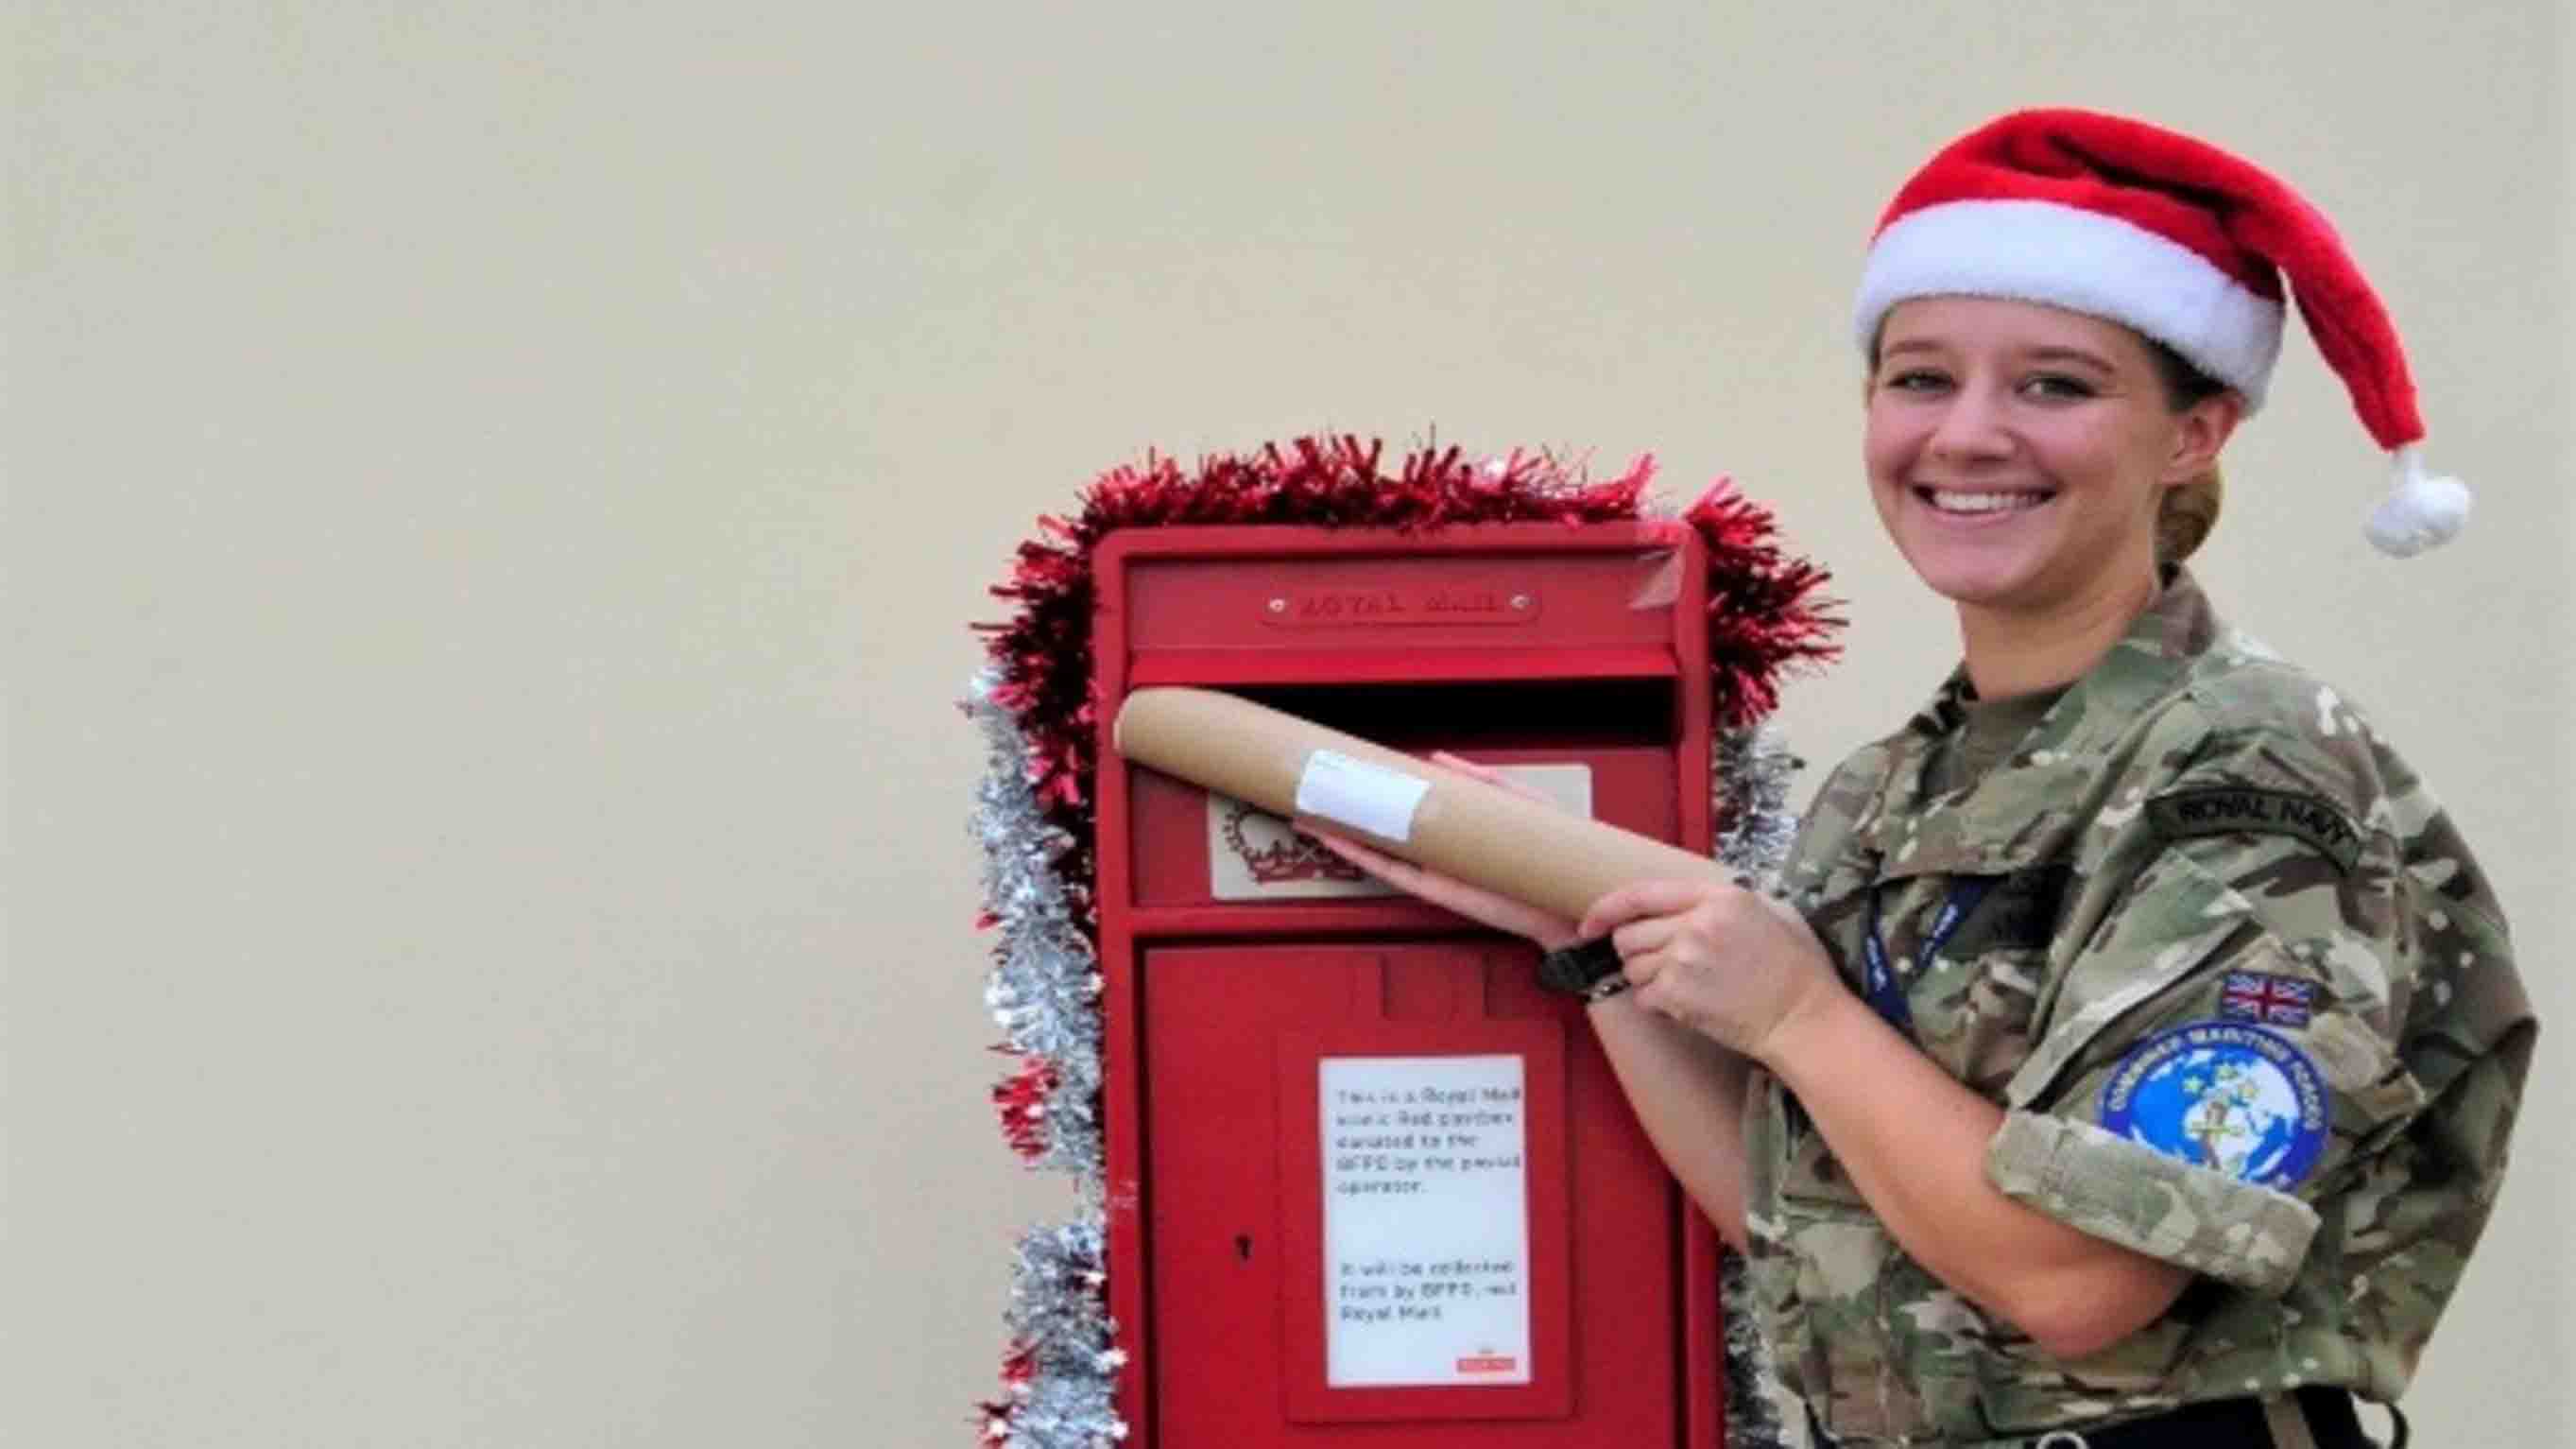 A red Royal Mail post box install in a wall in Bahrain, with a woman dressed in a Santa hair smiling as she posts a Christmas parcel